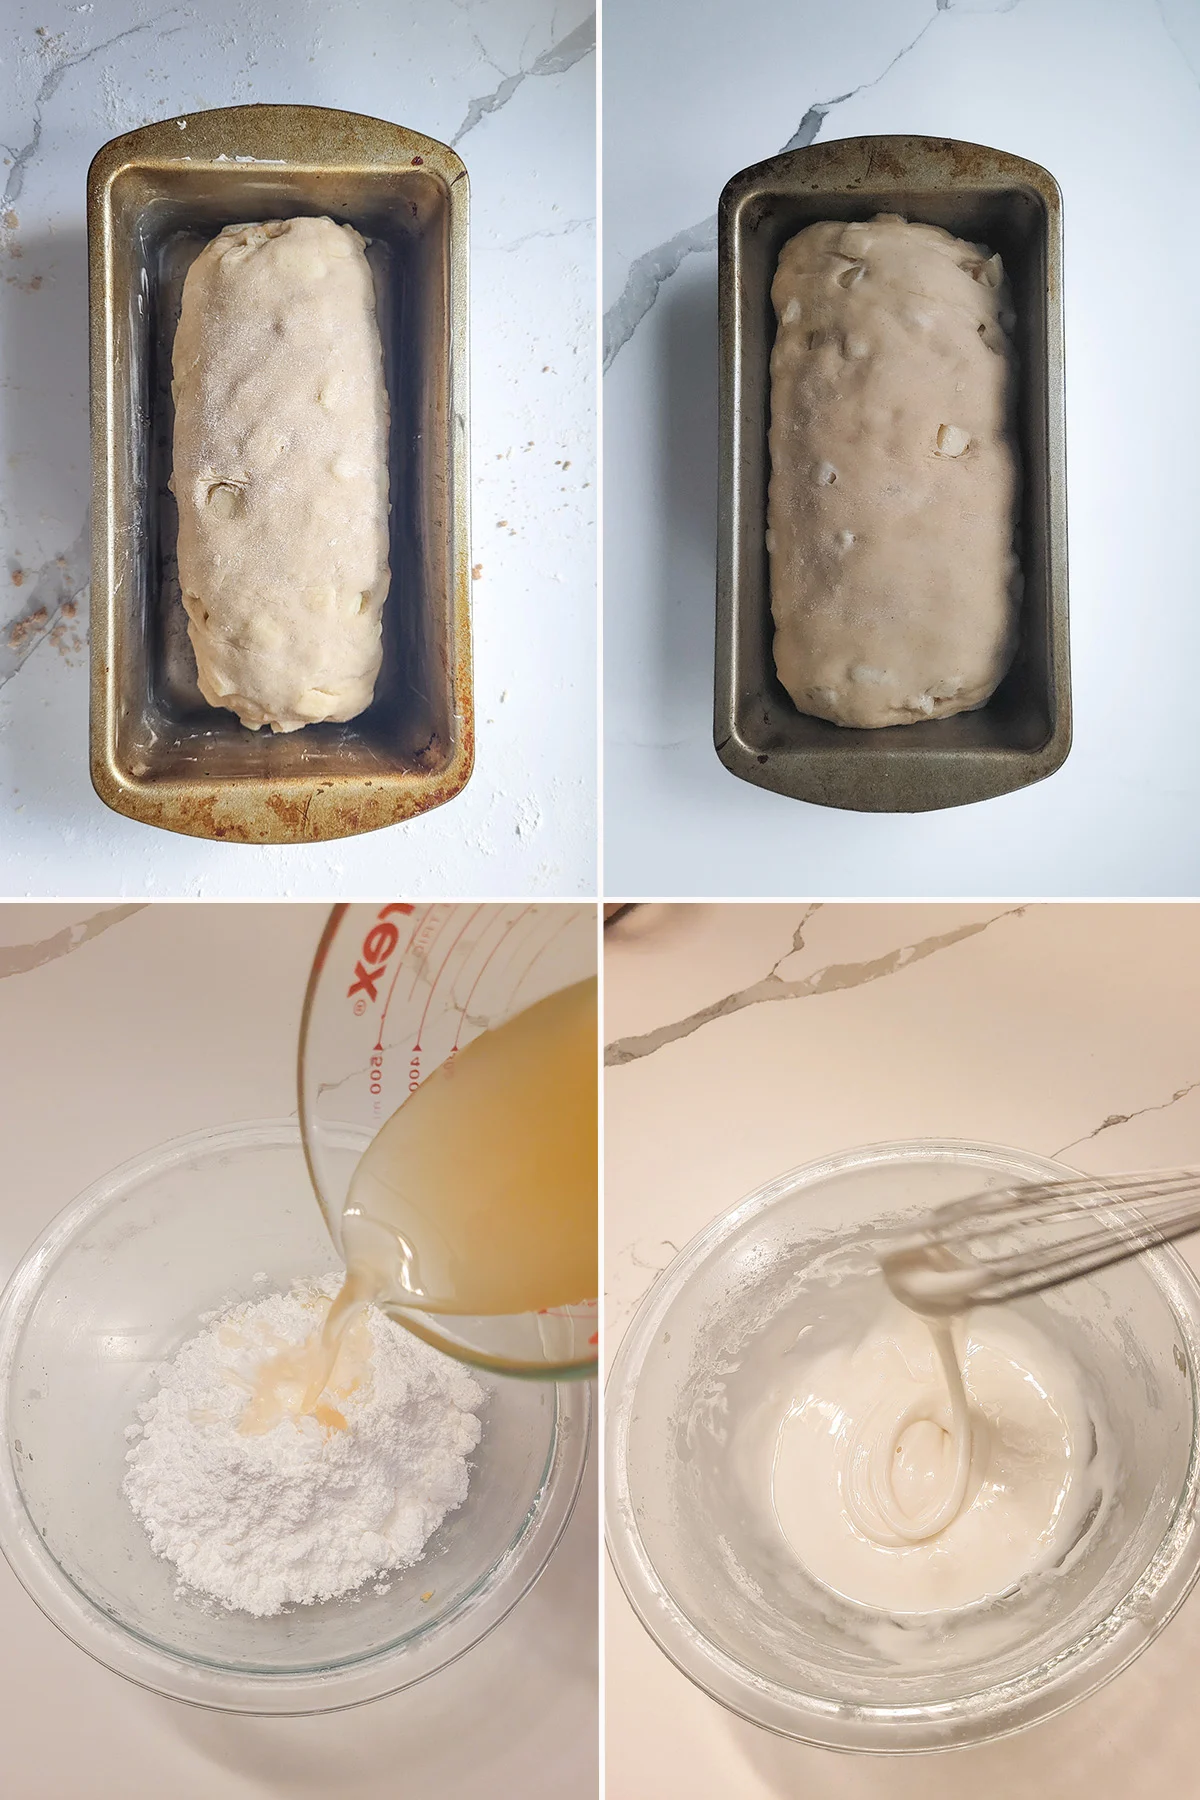 a loaf of bread in a pan before and after rising. Powdered sugar mixed with apple juice in a glass bowl.